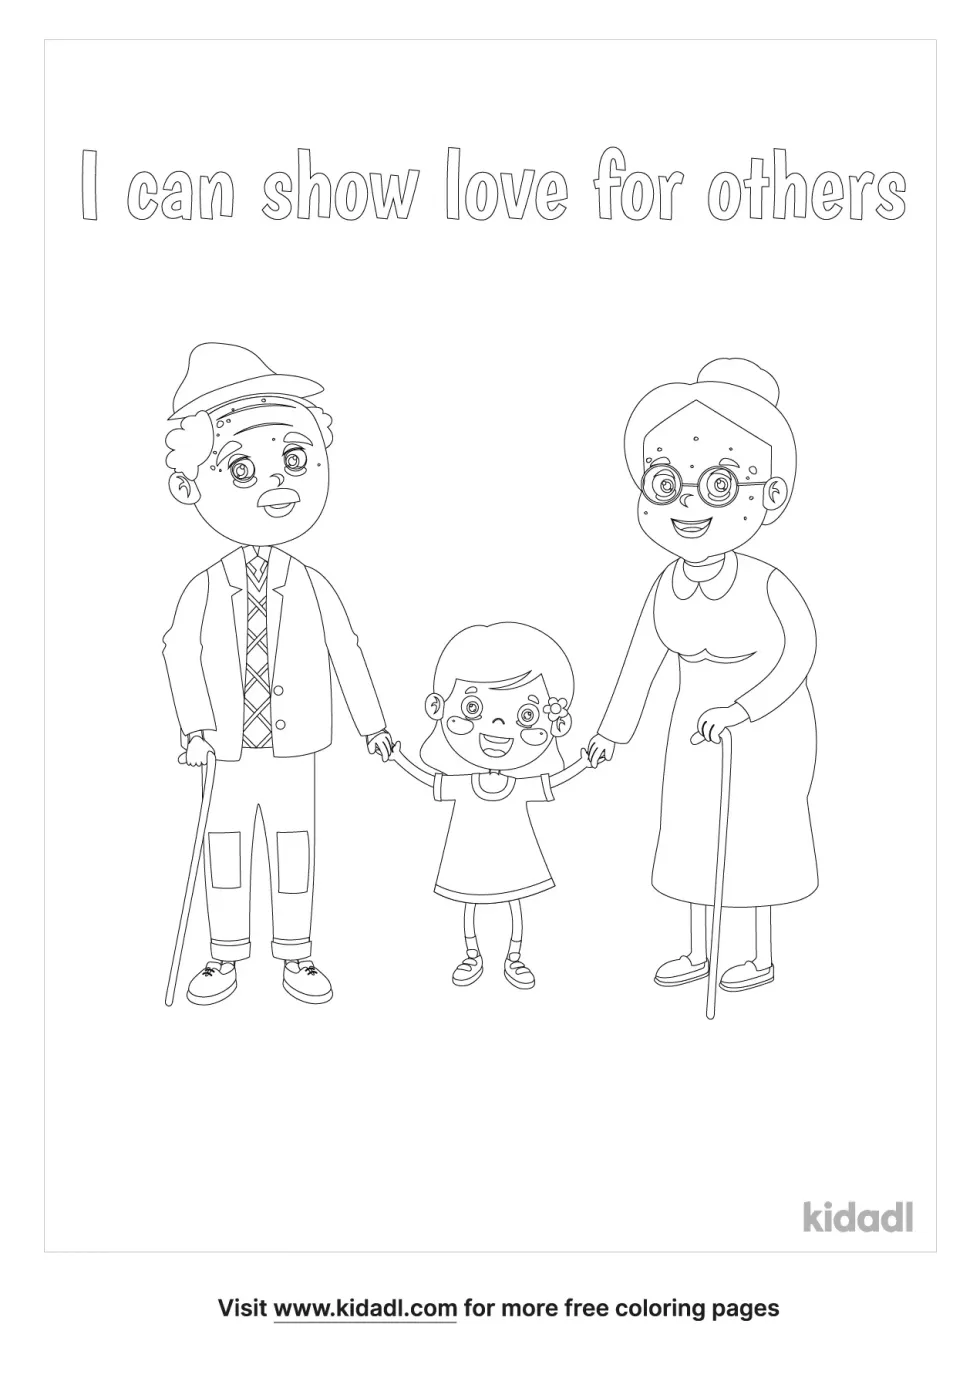 I Can Show Love For Others Coloring Page